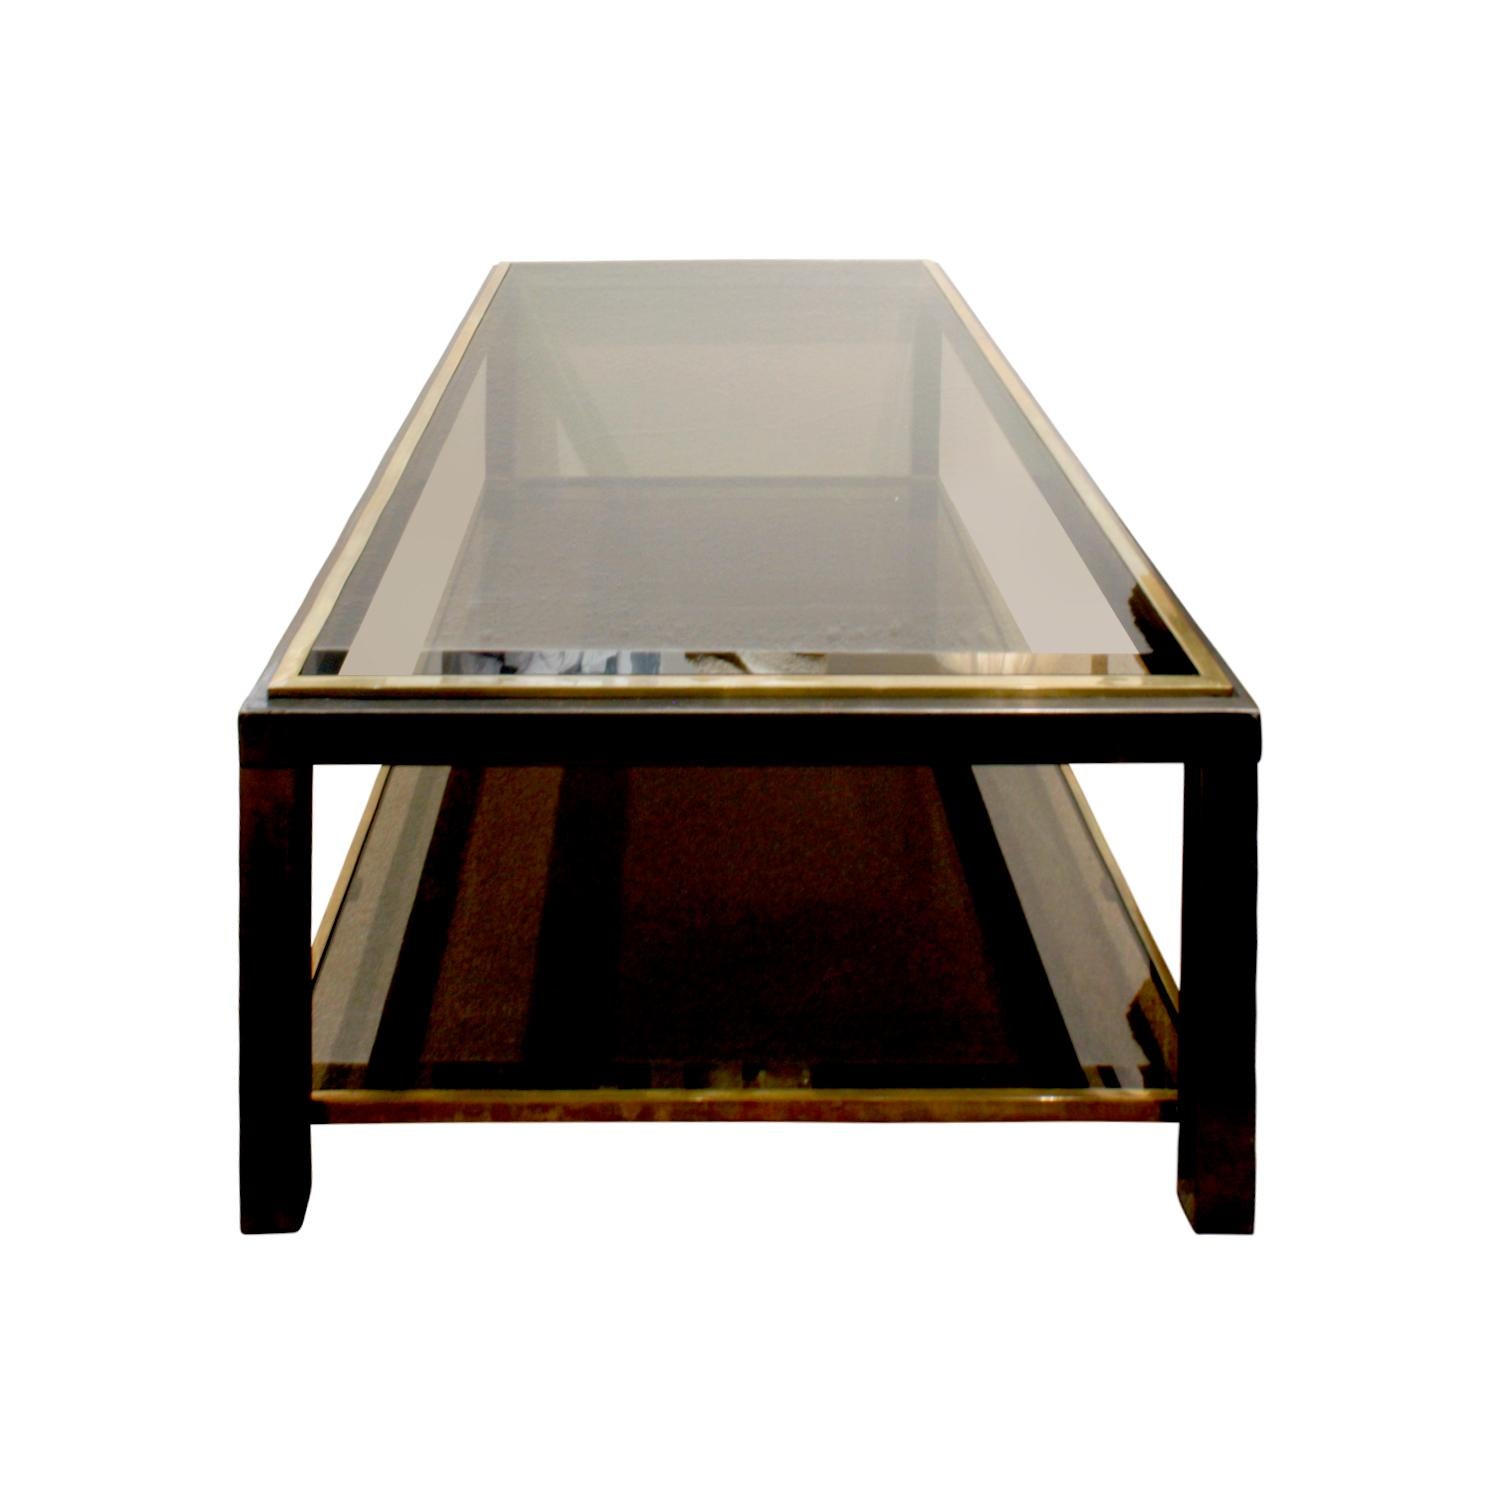 Italian Willy Rizzo 2-Tier Coffee Table in Gunmetal and Brass, 1960s